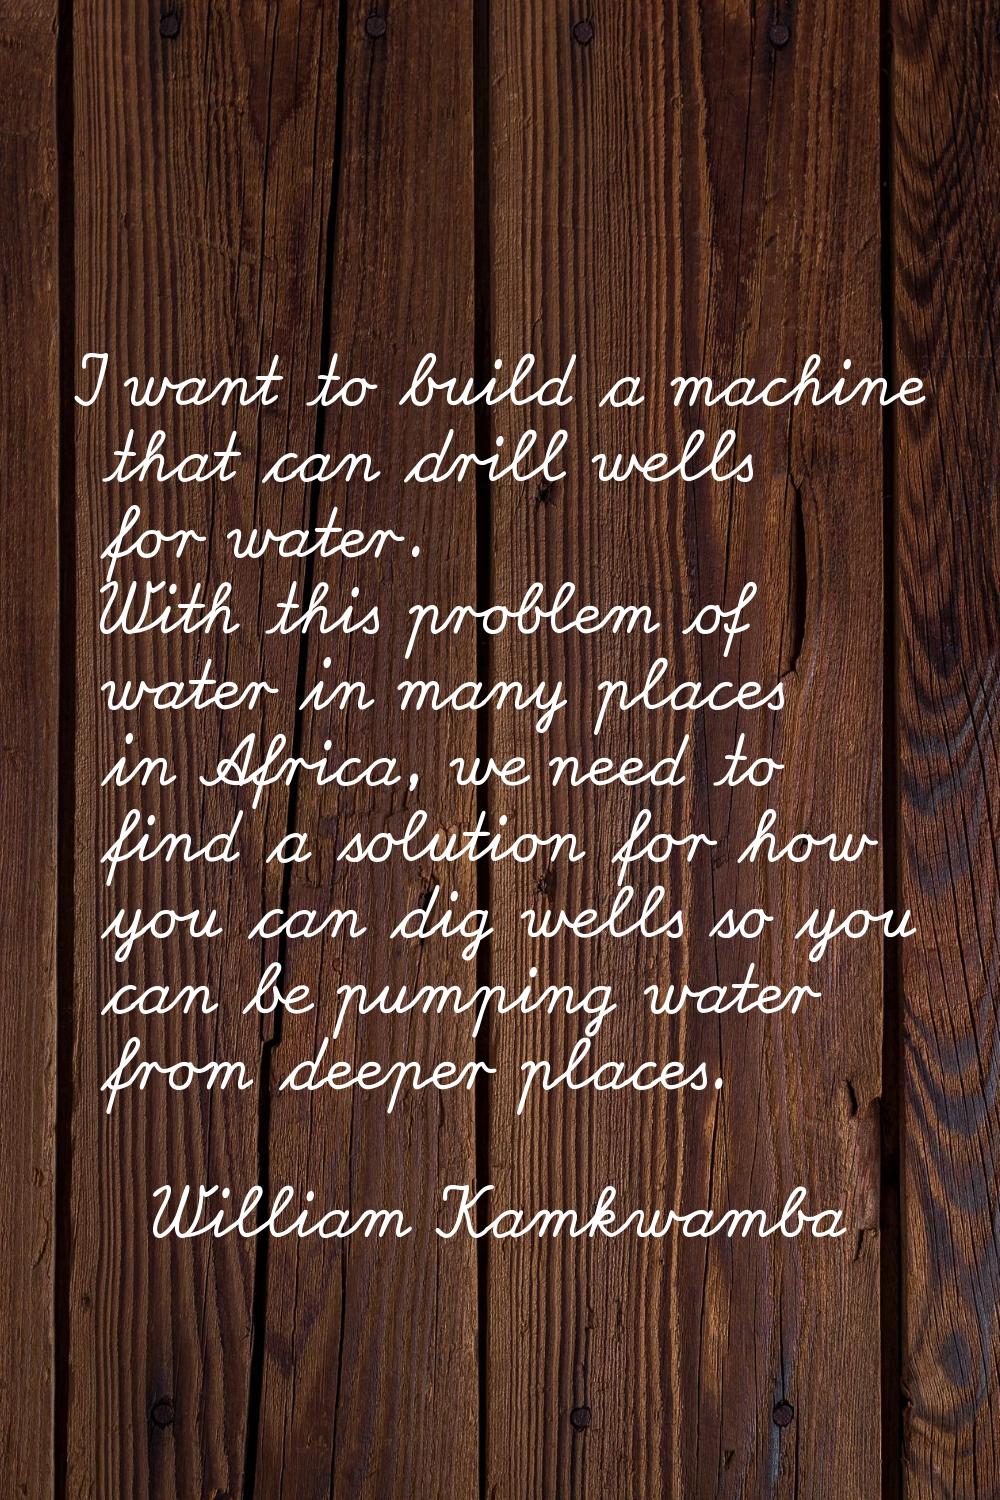 I want to build a machine that can drill wells for water. With this problem of water in many places